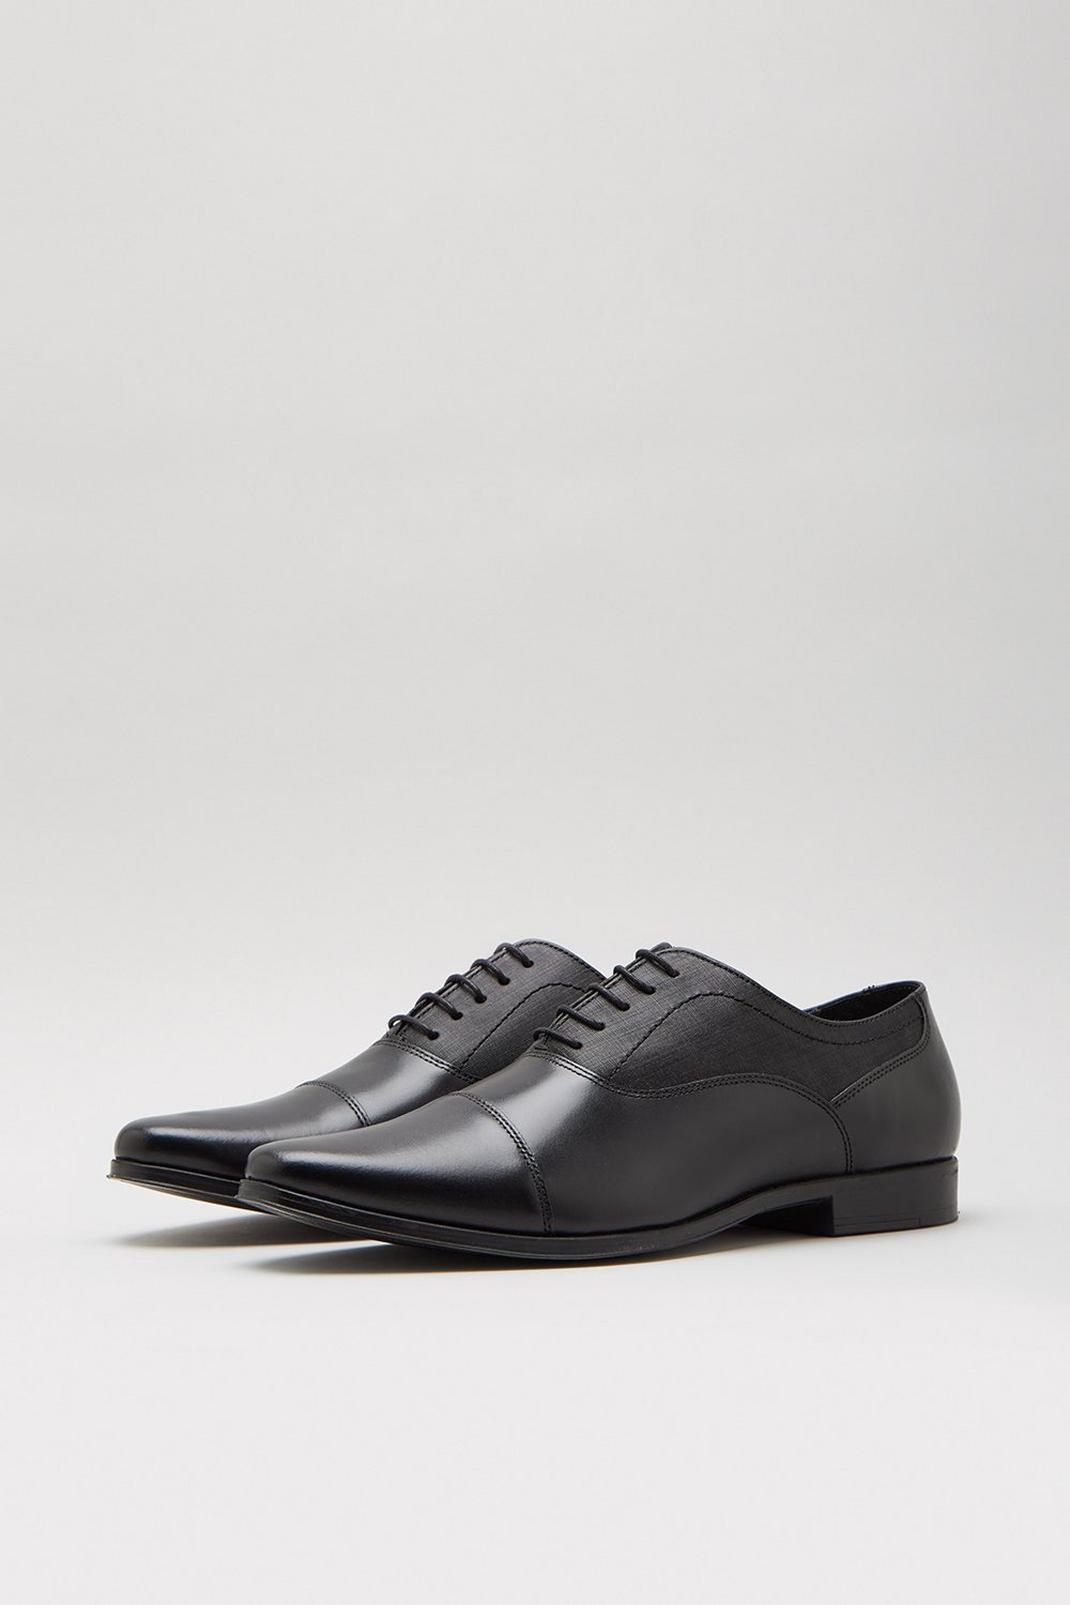 105 Leather Toe Cap Oxford Shoes image number 2